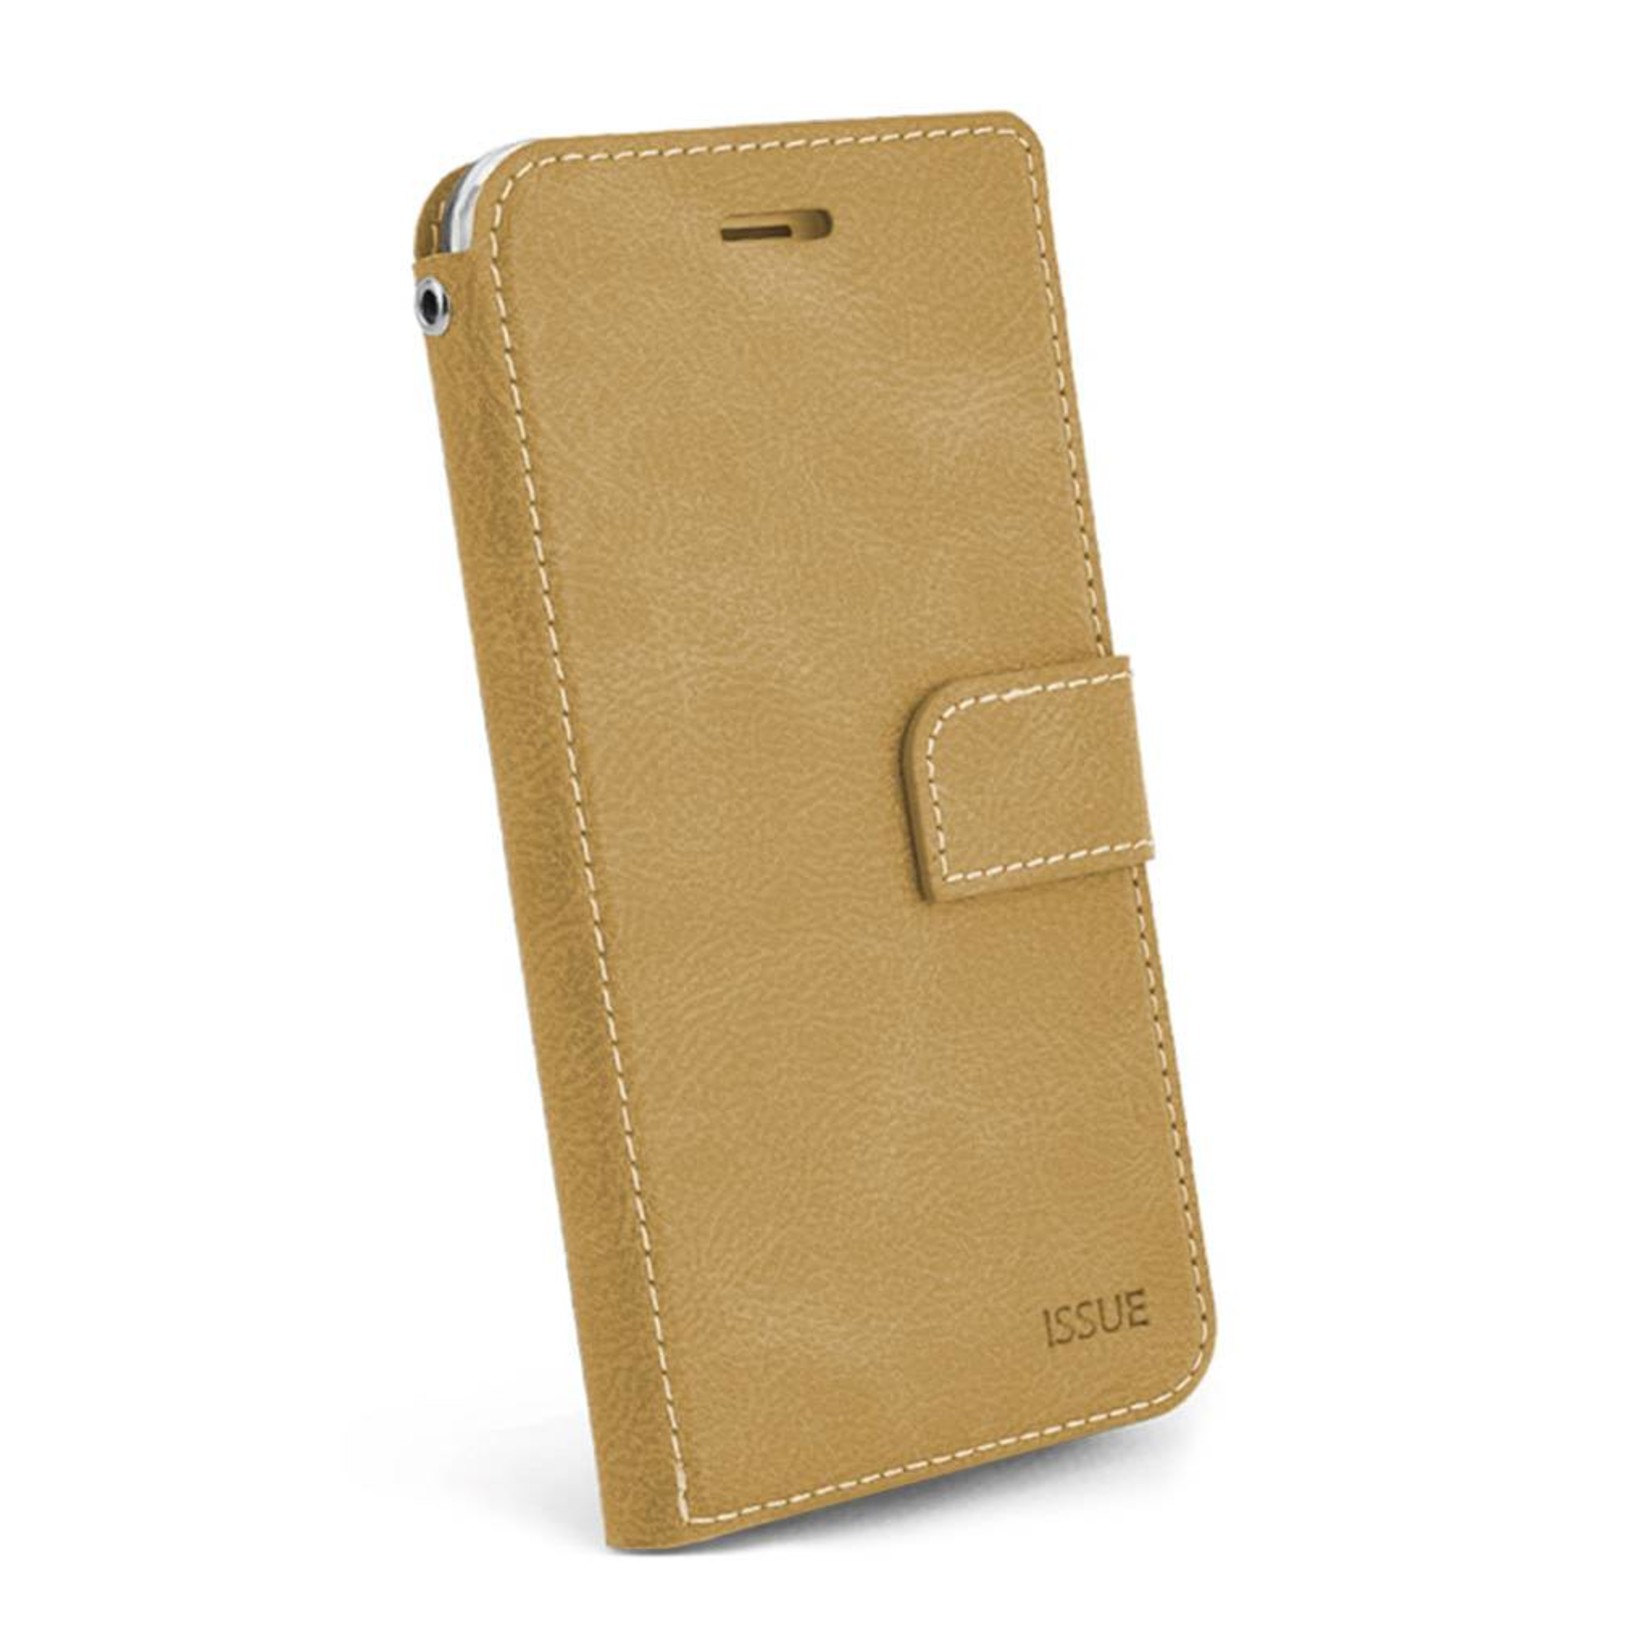 Molan Cano Issue Diary PU Leather Wallet Case for iPhone X / XS